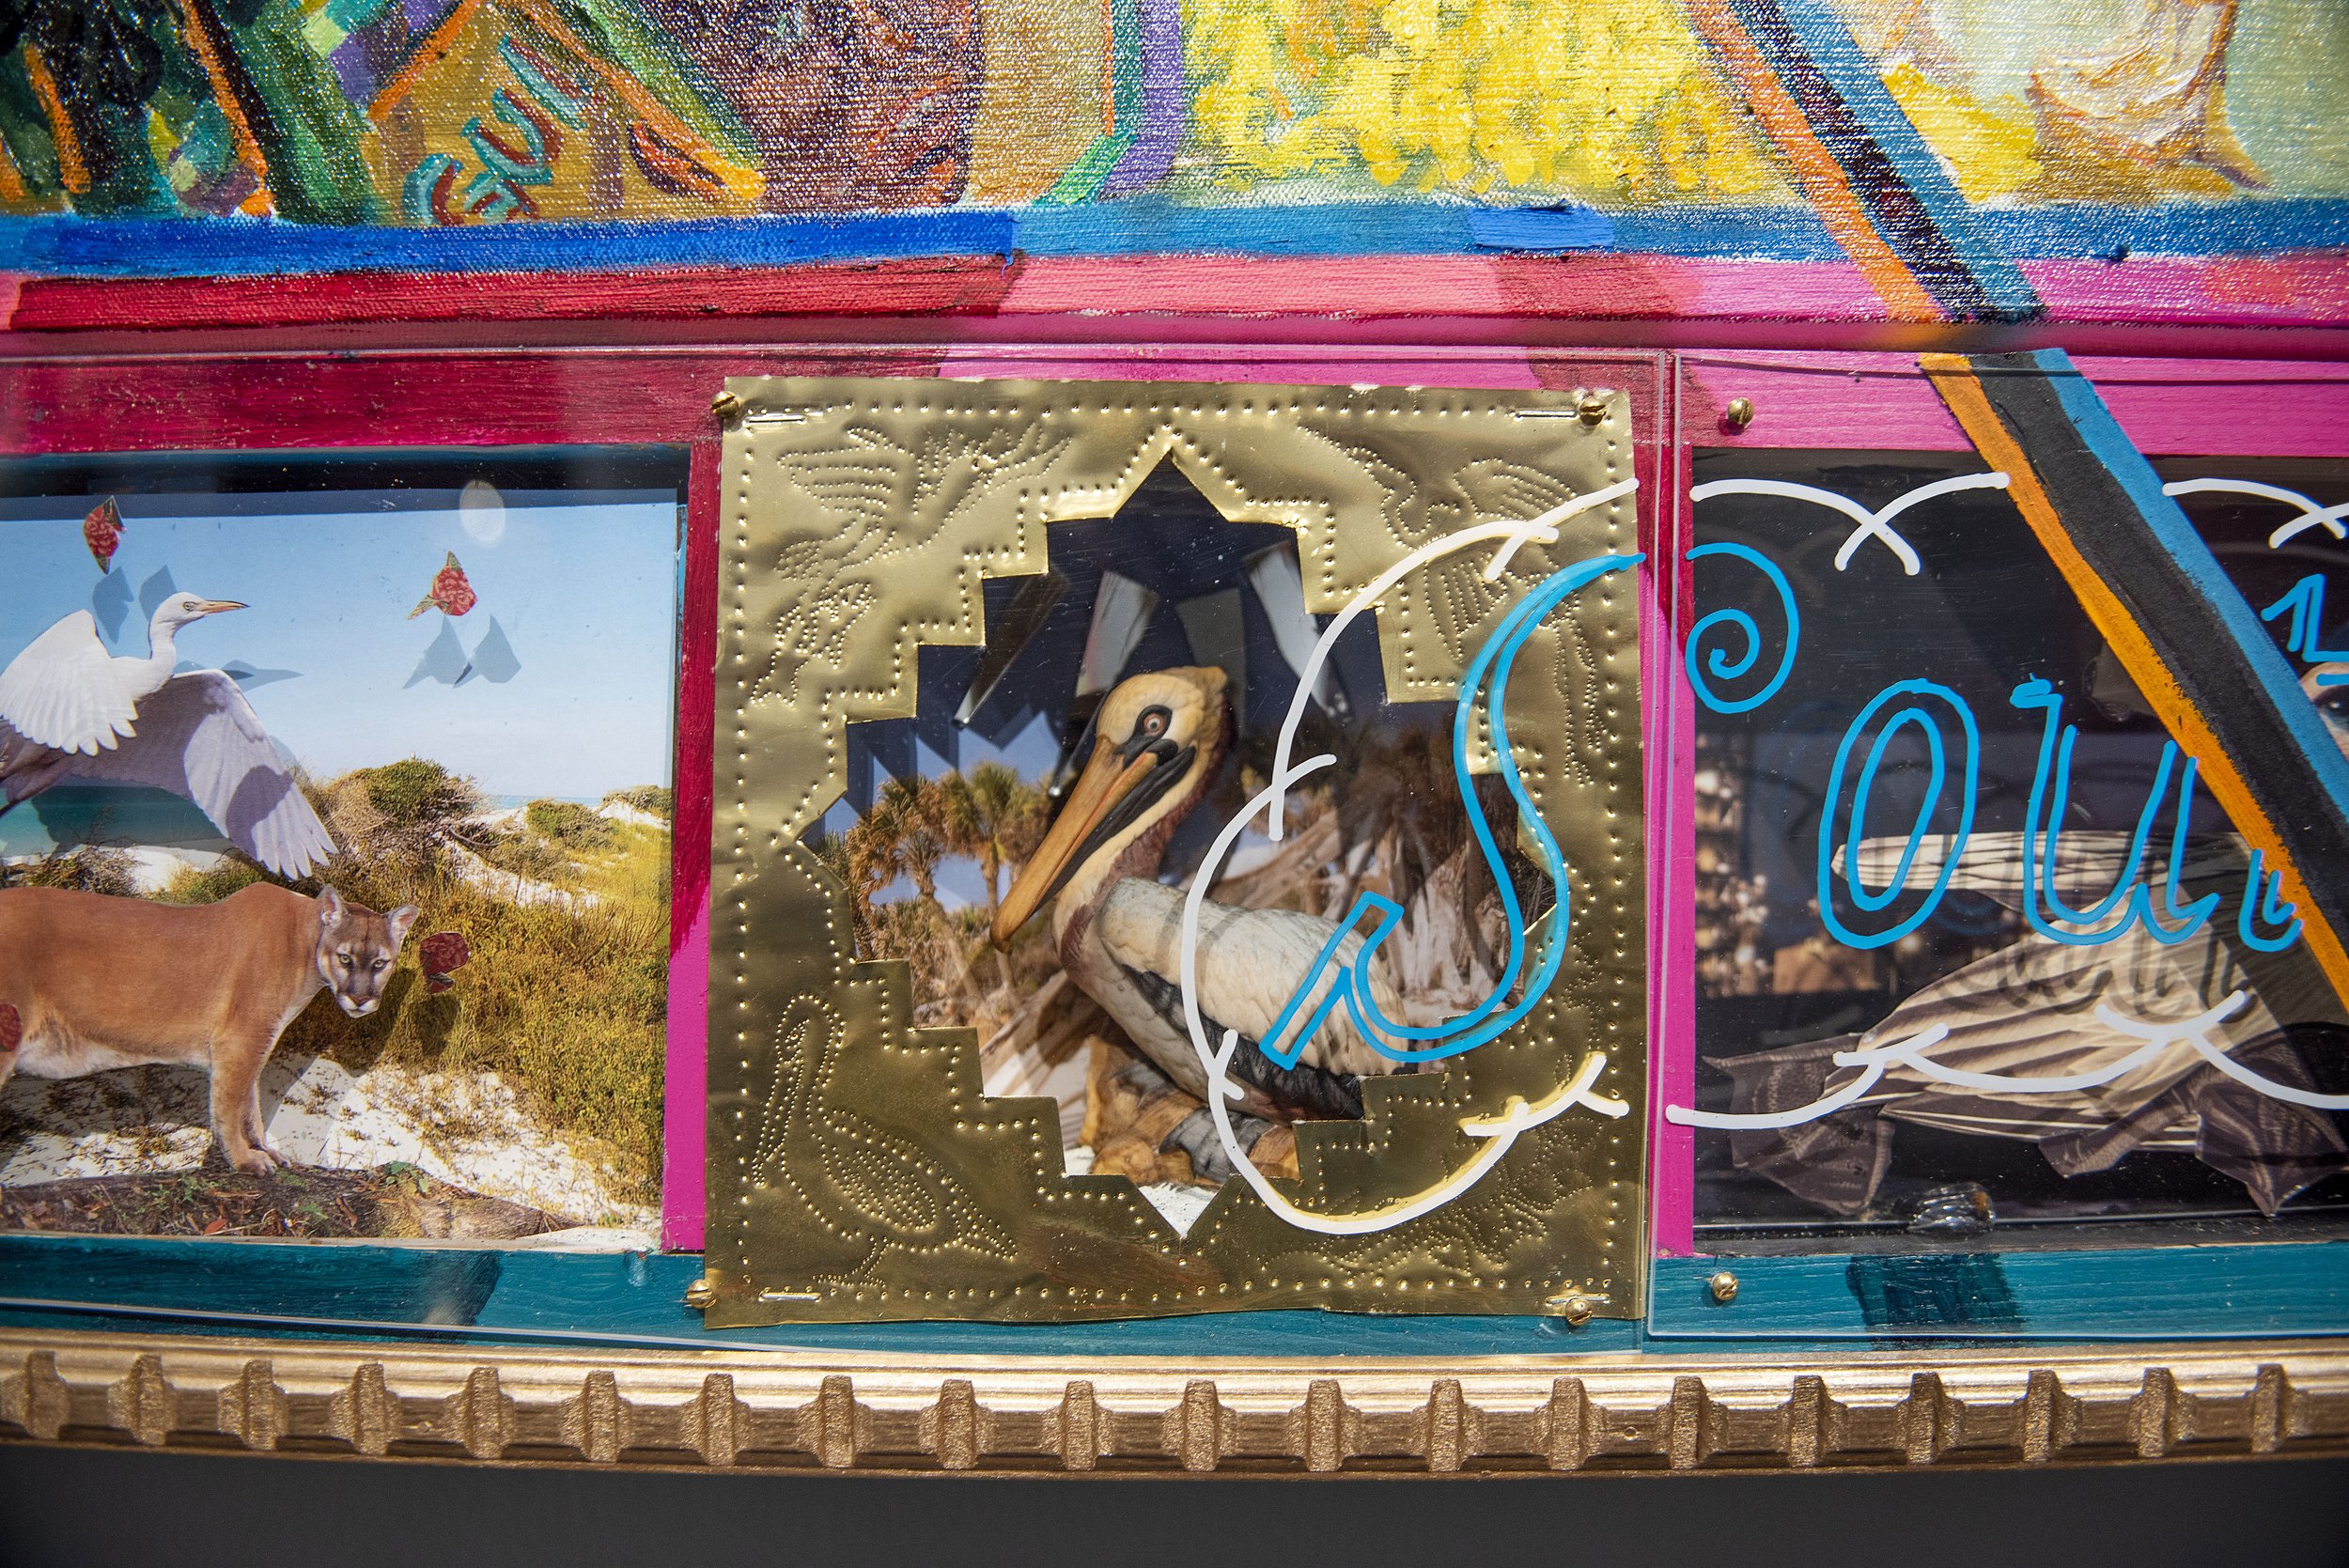  IMAGE (detail): Mark Messersmith (American, b. 1955),  Summer 2010 , 2010, mixed media on canvas with predella boxes and carved wood, Gift of the Artist, L2021.12a,b 